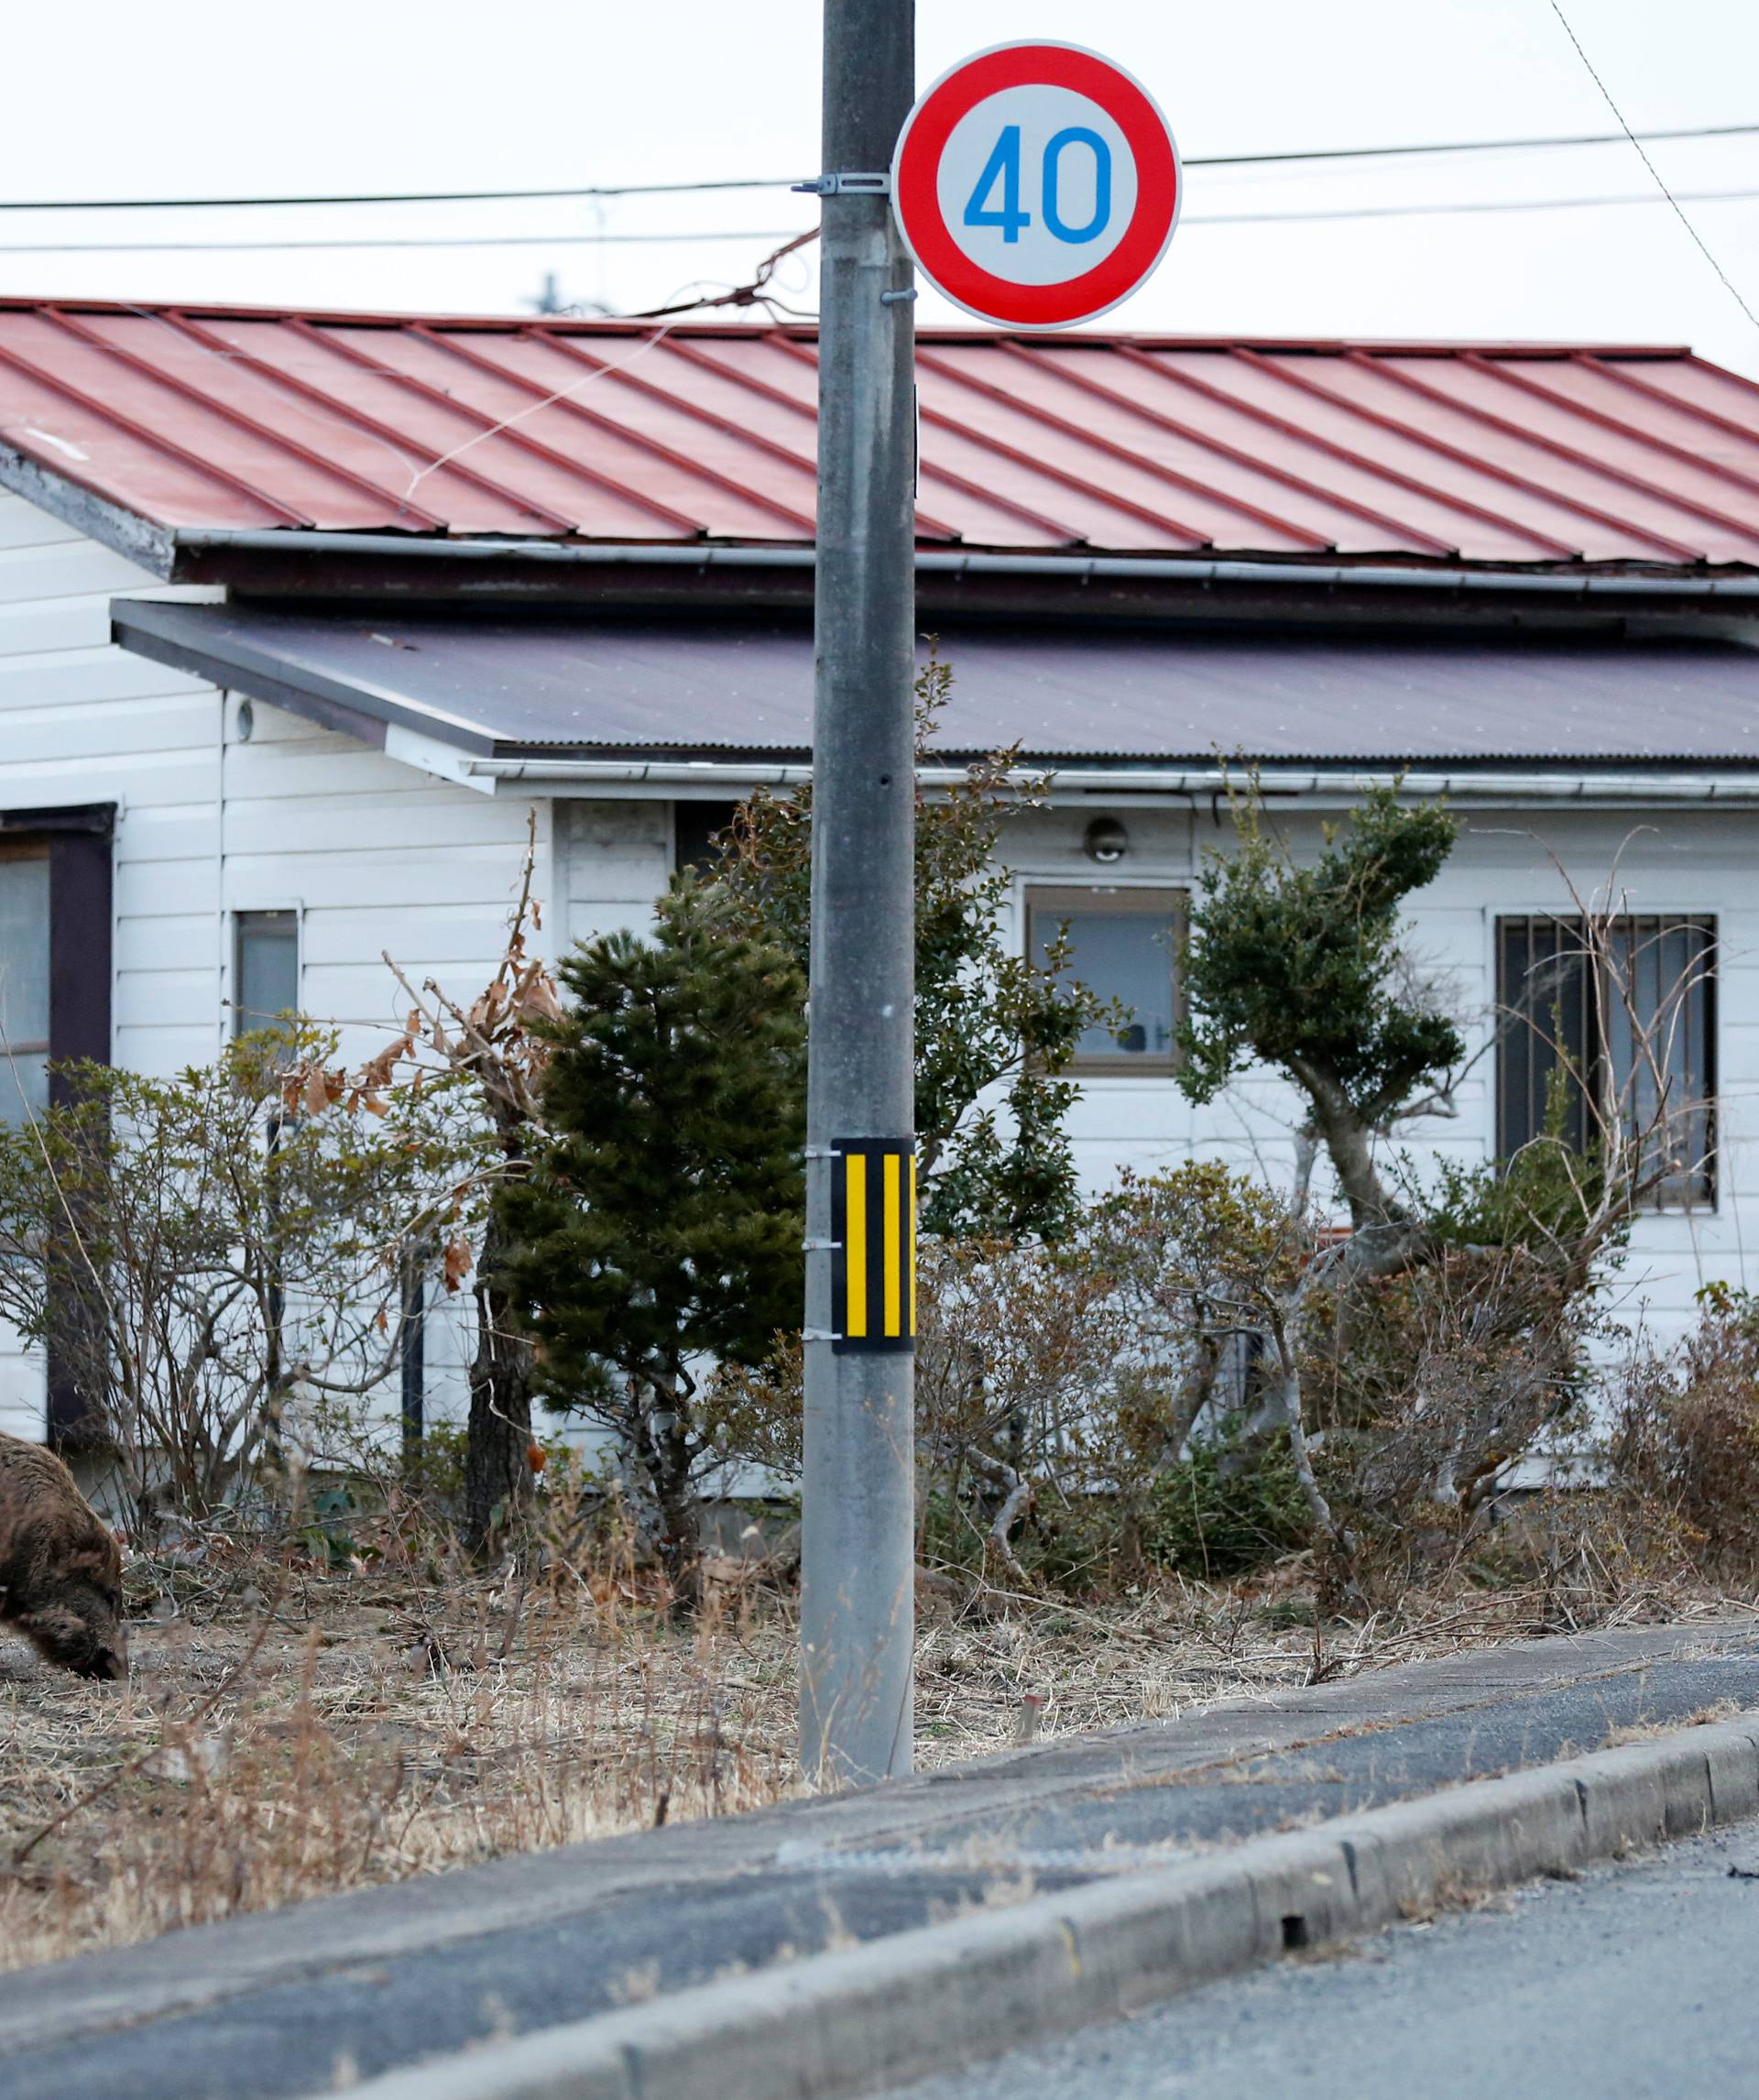 Wild boar is seen at a residential area in an evacuation zone near TEPCO's tsunami-crippled Fukushima Daiichi nuclear power plant in Namie town